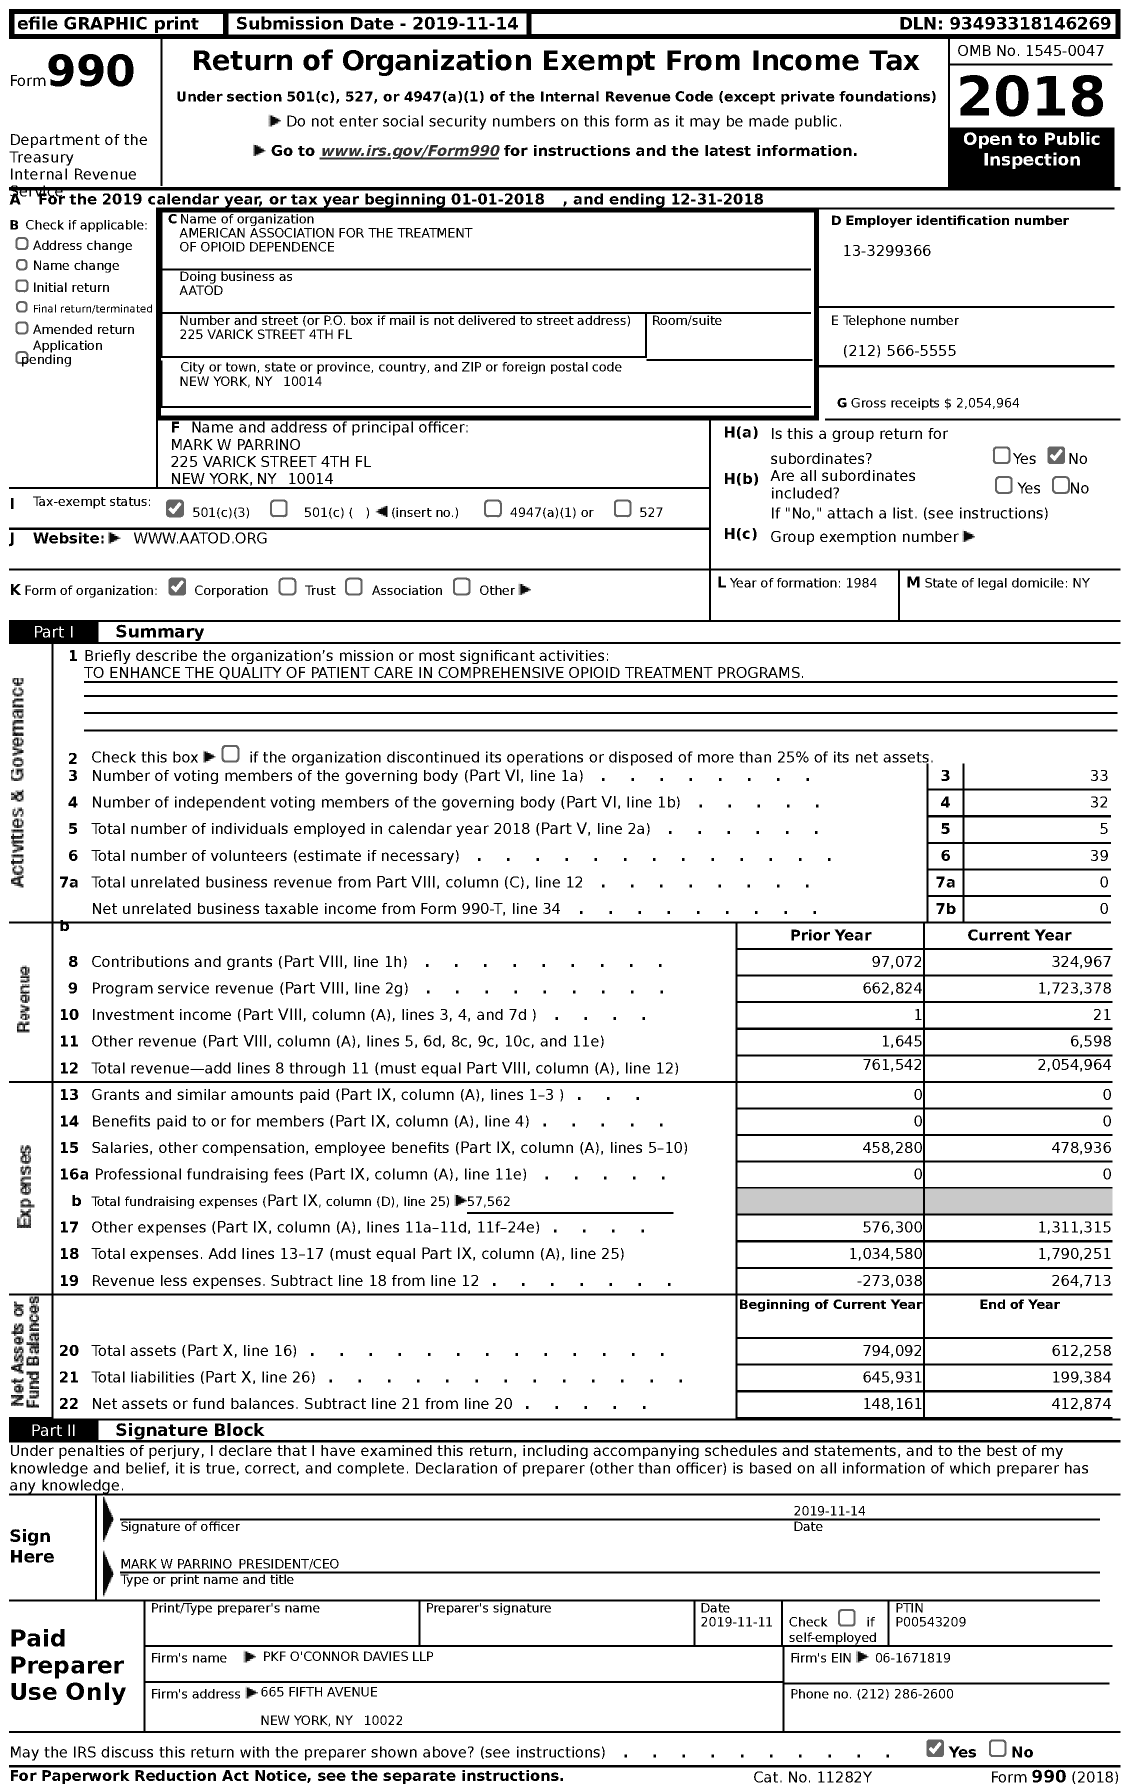 Image of first page of 2018 Form 990 for The American Association for the Treatment of Opioid Dependence (AATOD)